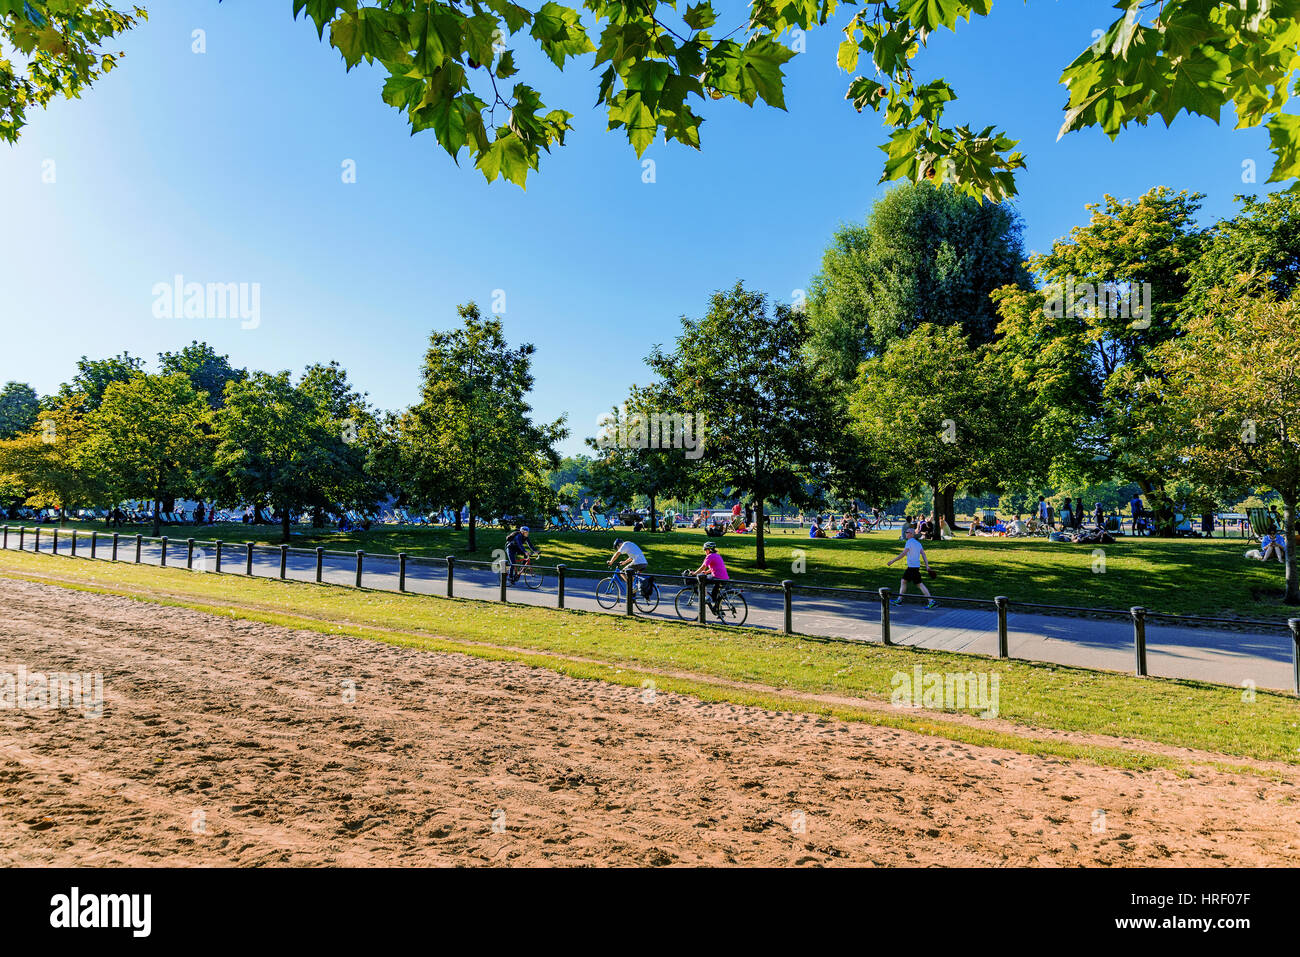 LONDON - JULY 19:  Hyde park is a famous London park. People are cycling on a hot day in the summer on July 19, 2016 in London Stock Photo